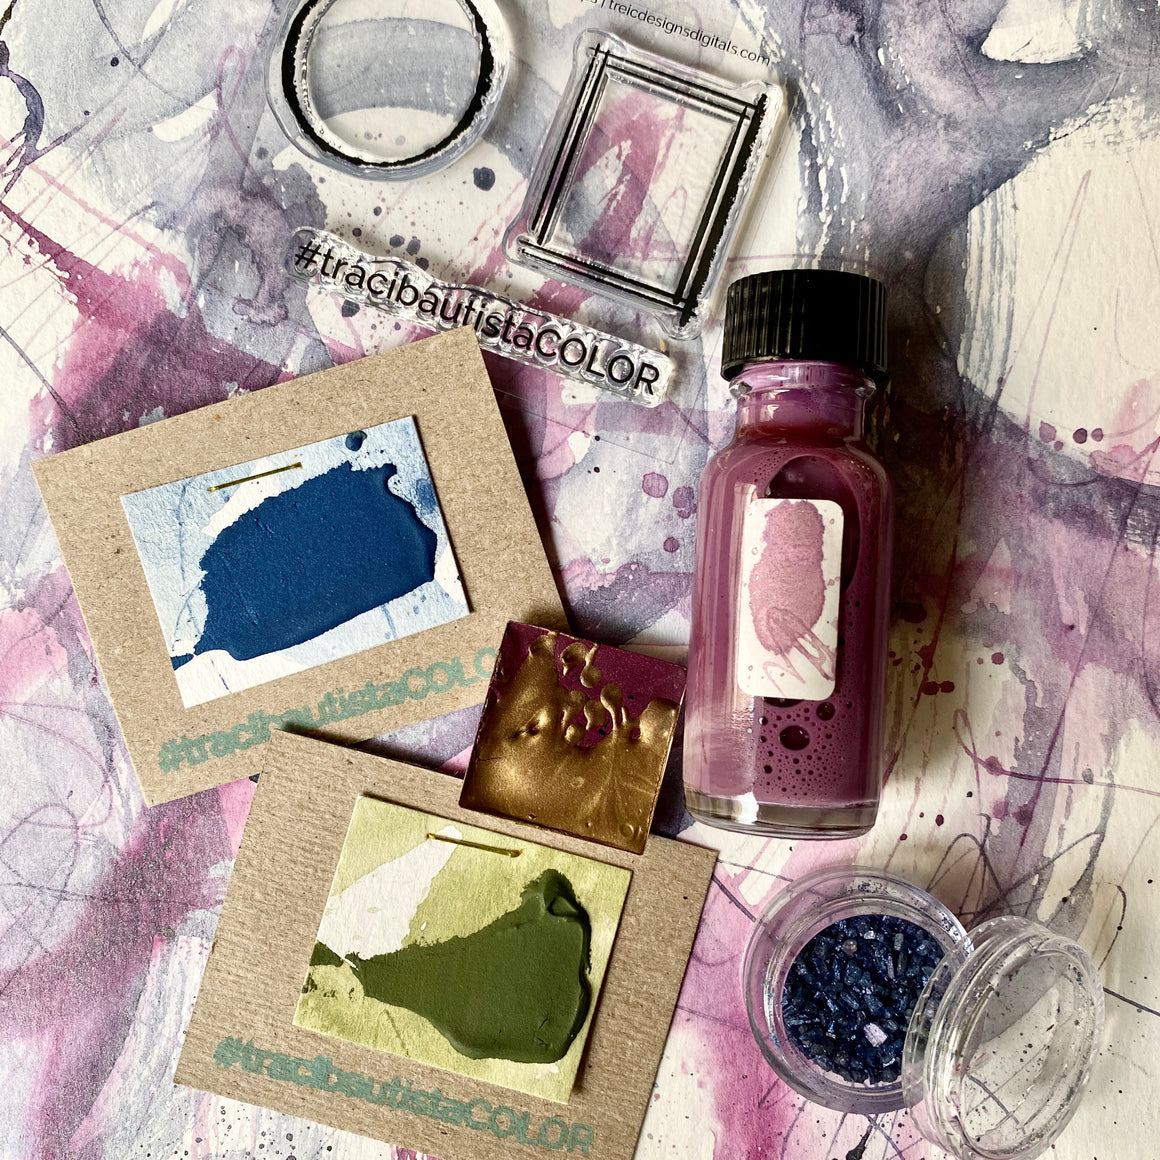 #tracibautistaCOLOR ~ SUMMER 2020 artisanal watercolor collection + workshop